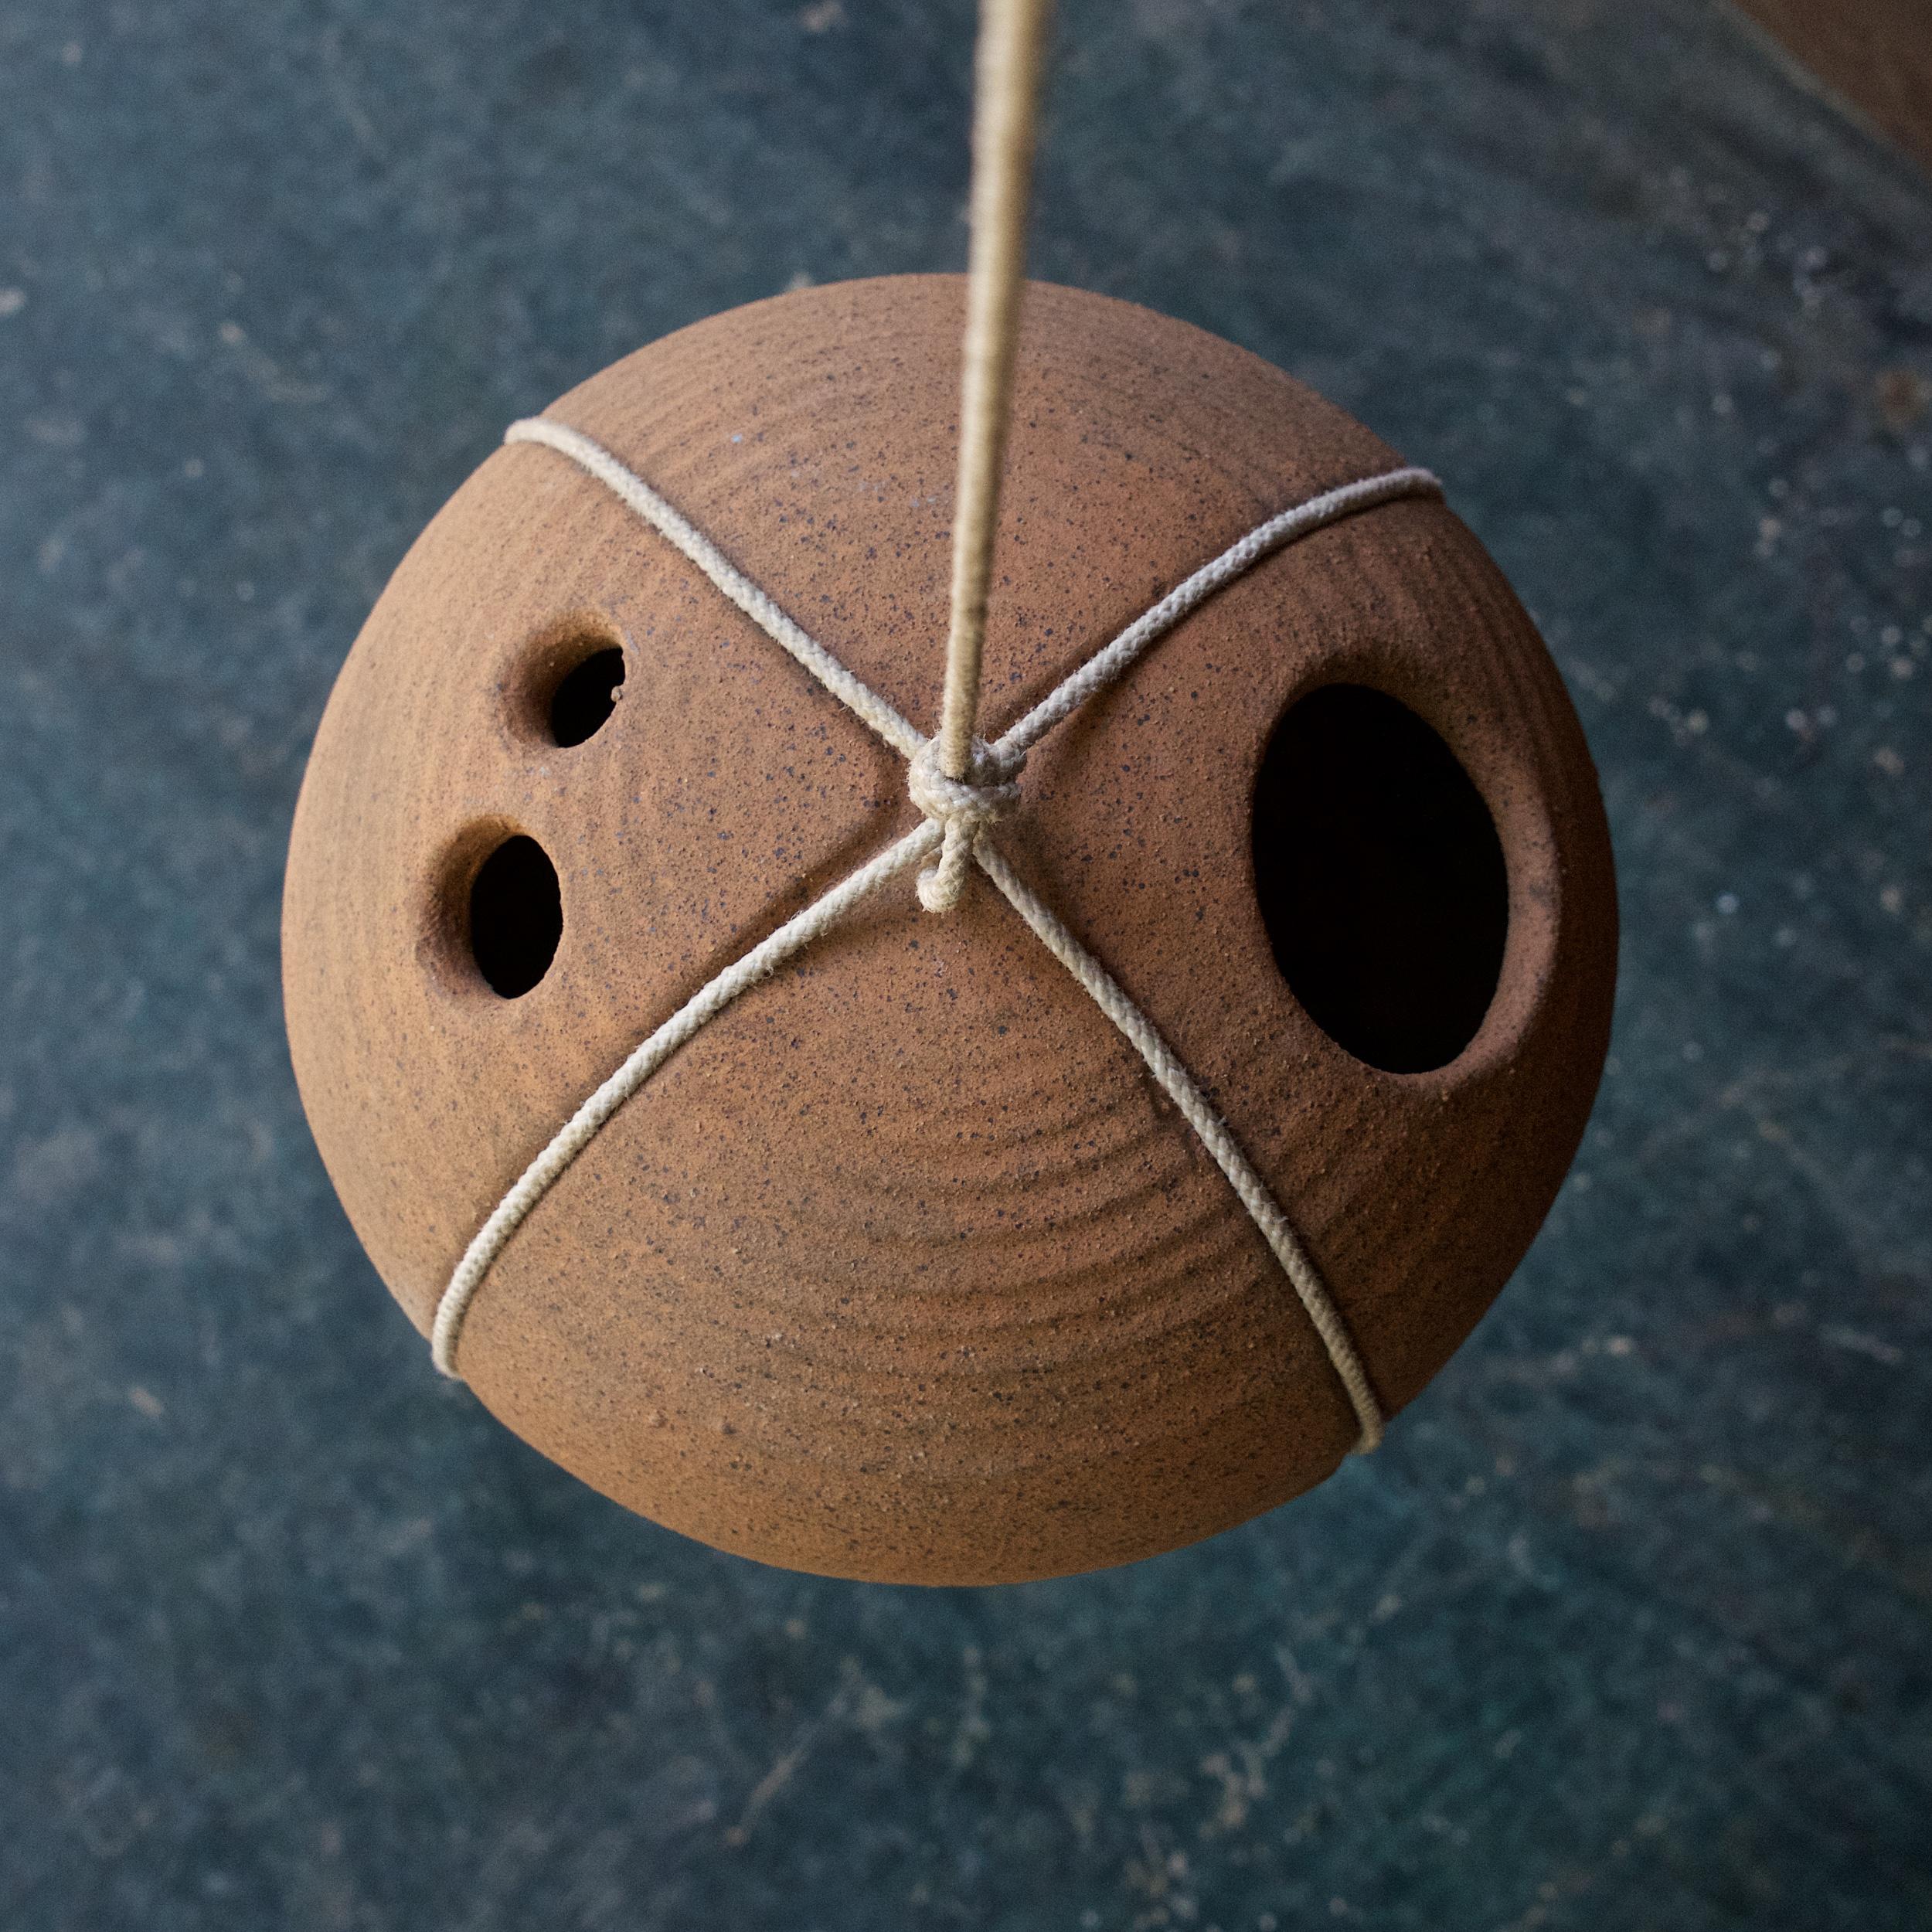 Mid-20th Century Midcentury String and Stoneware Ball Birdhouse Architectural Pottery Folk Art